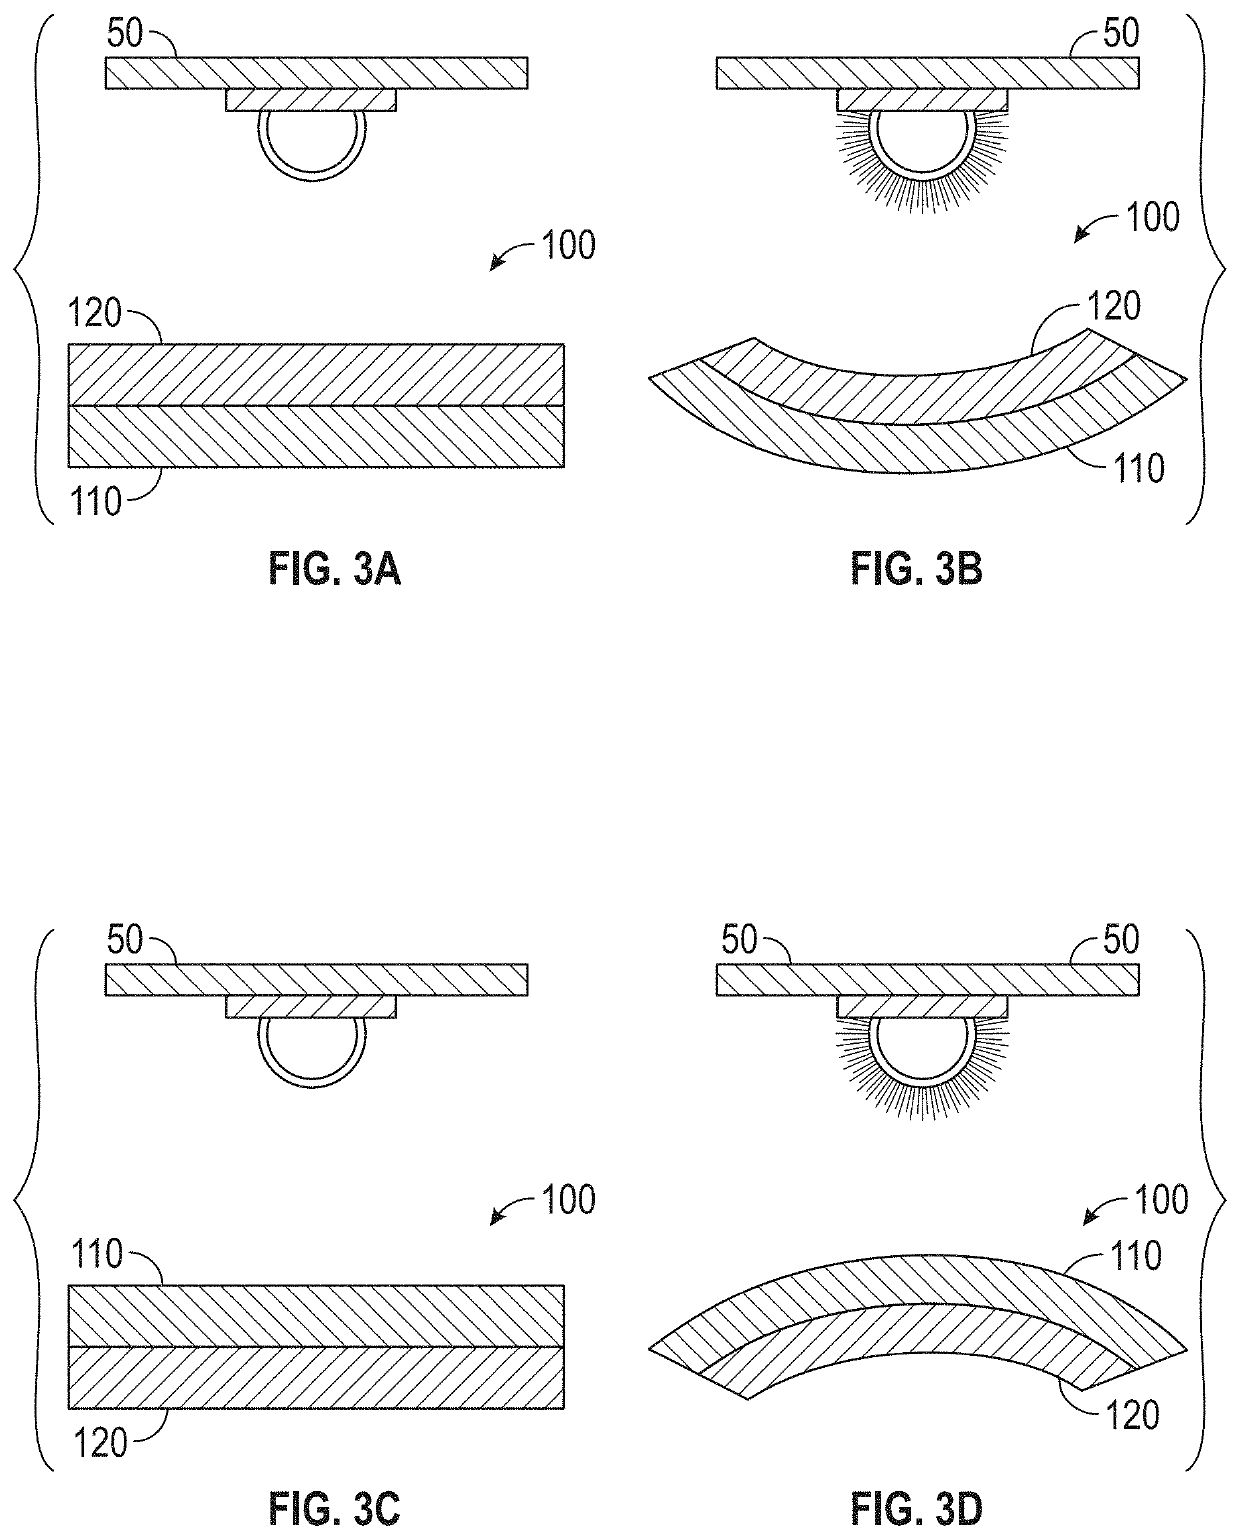 Externally Activated Shape Changing Device